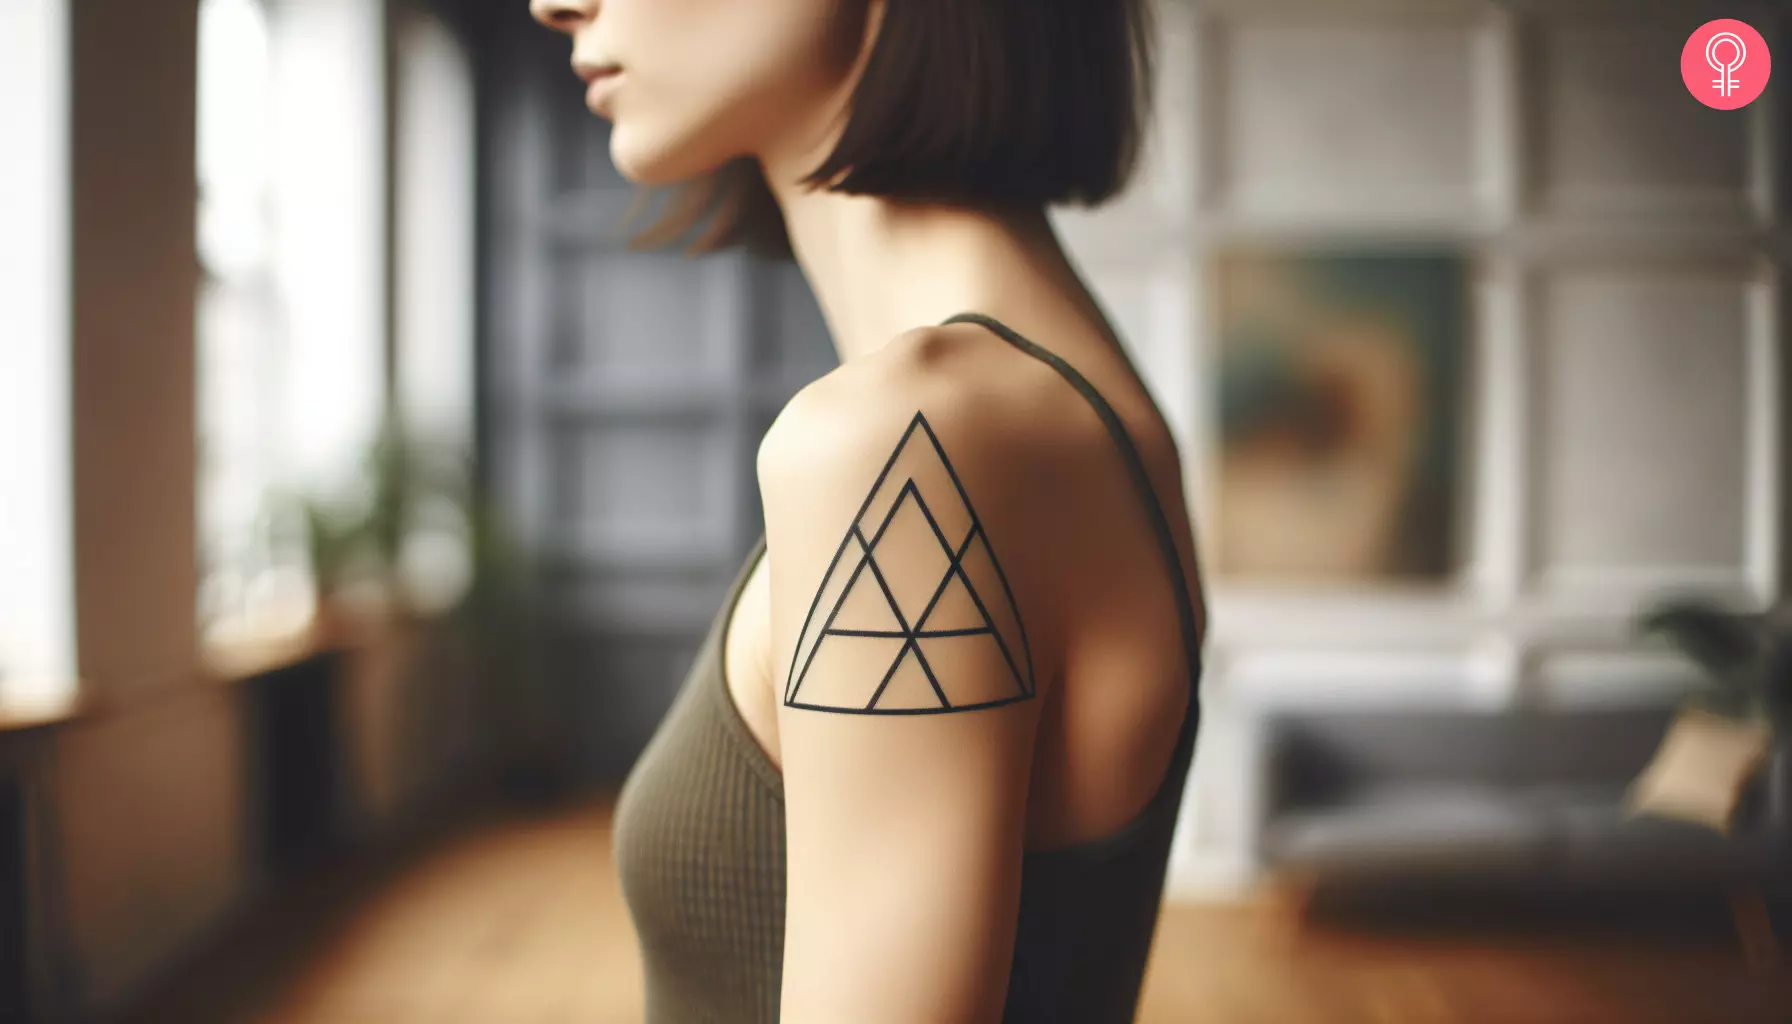 A woman with an overlapping triangle tattoo on her upper arm